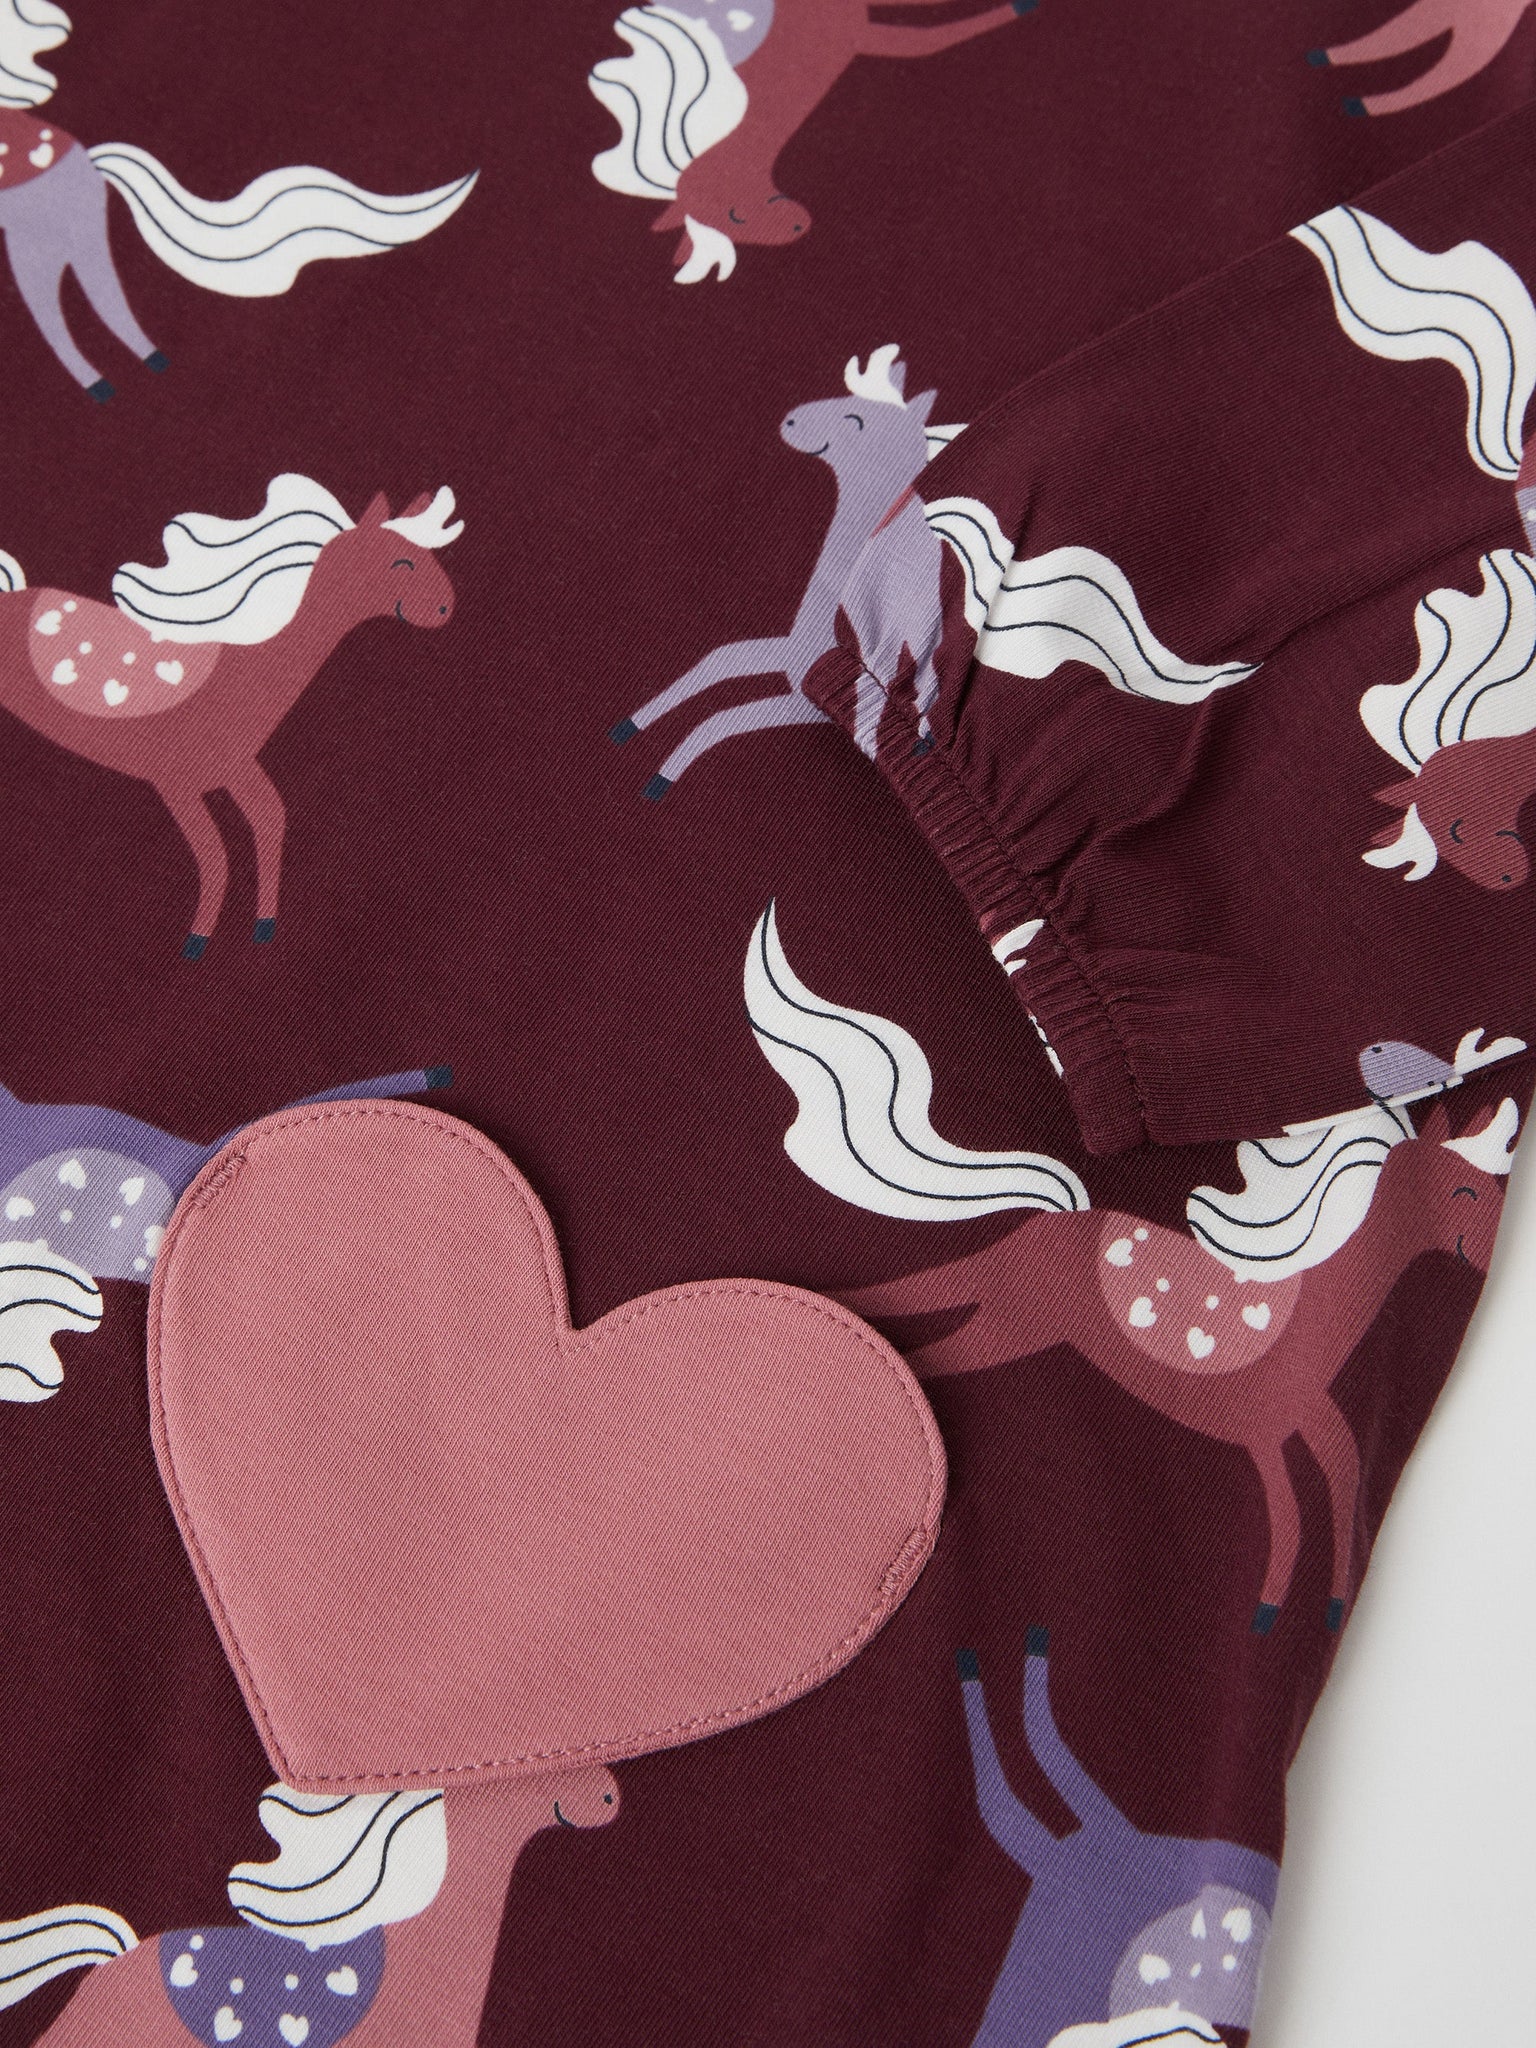 Burgundy Horse Print Kids Top from the Polarn O. Pyret kids collection. Clothes made using sustainably sourced materials.